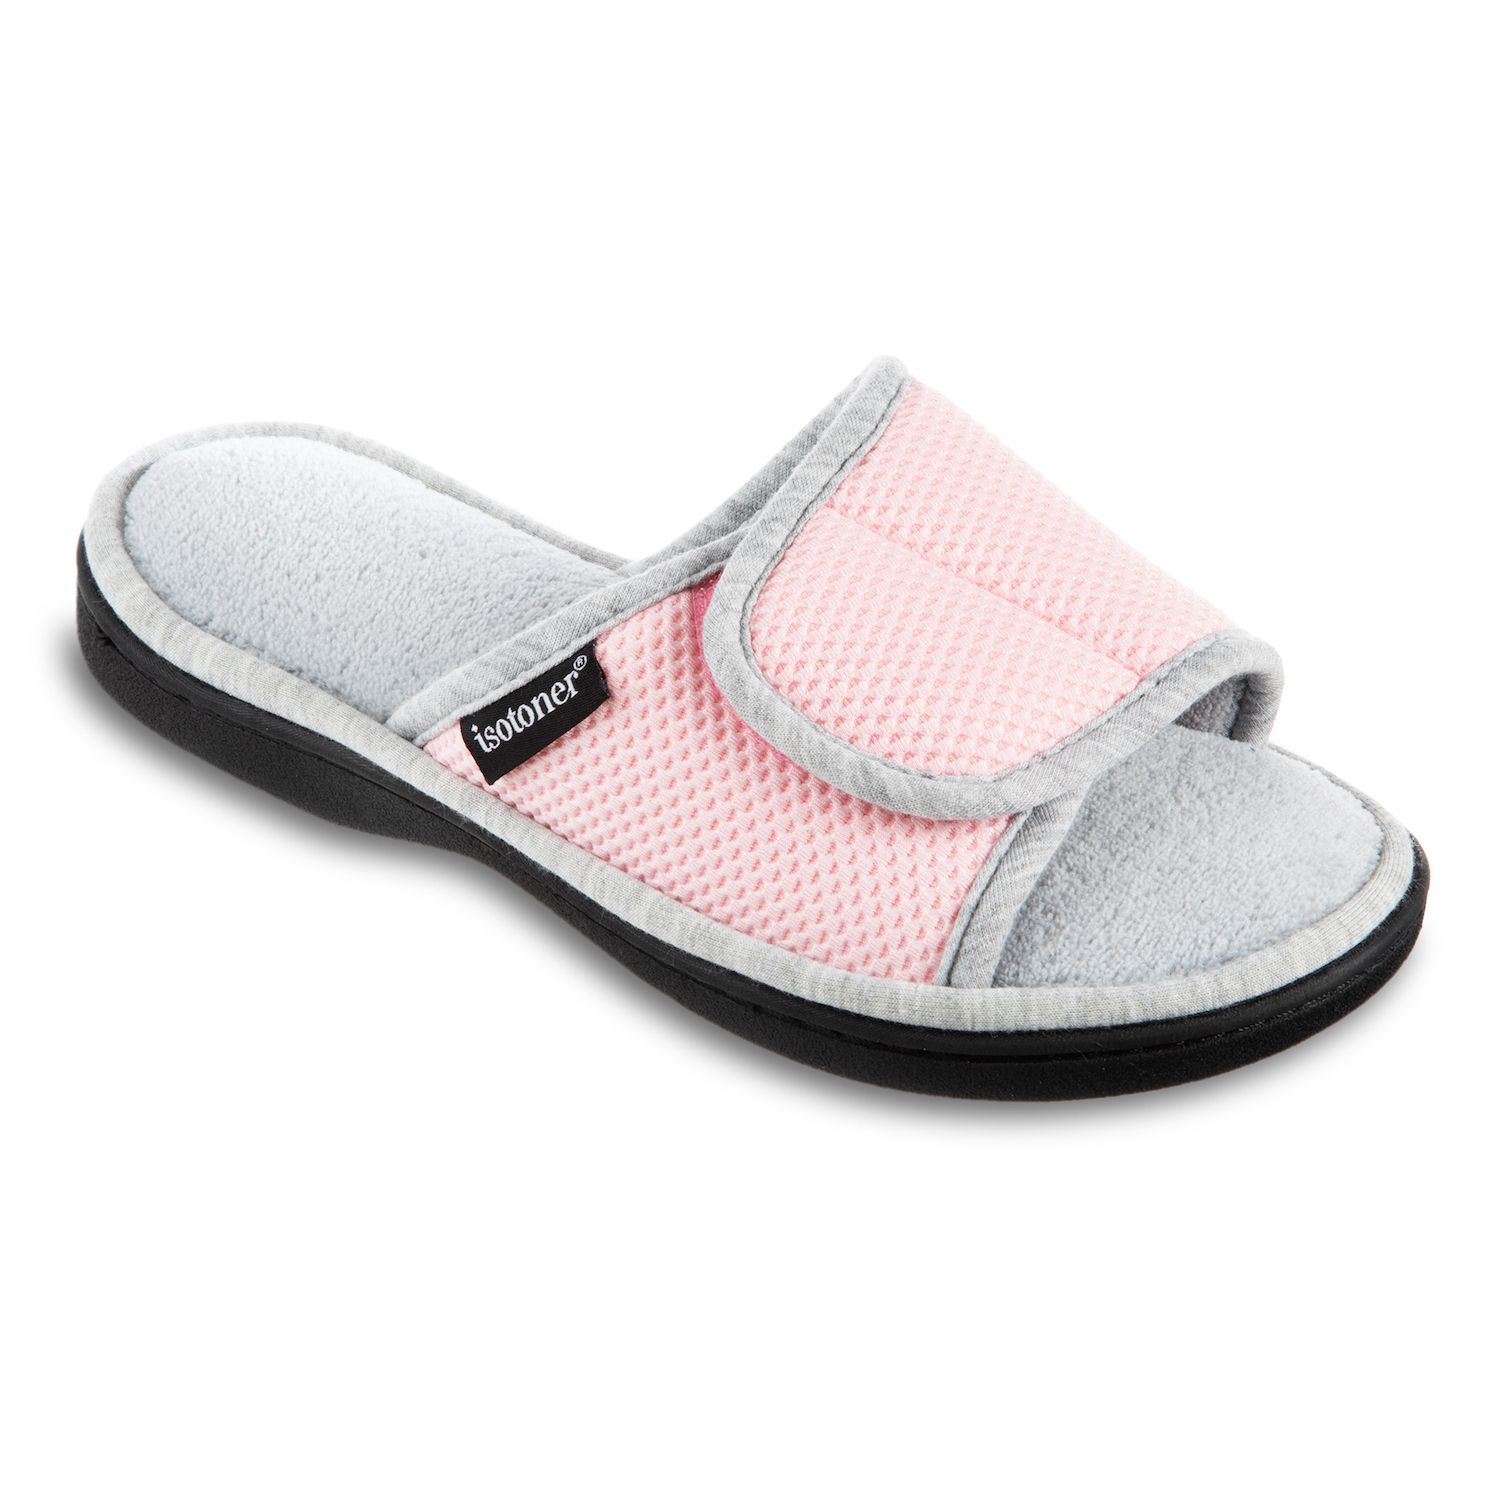 totes isotoner pillowstep slippers womens